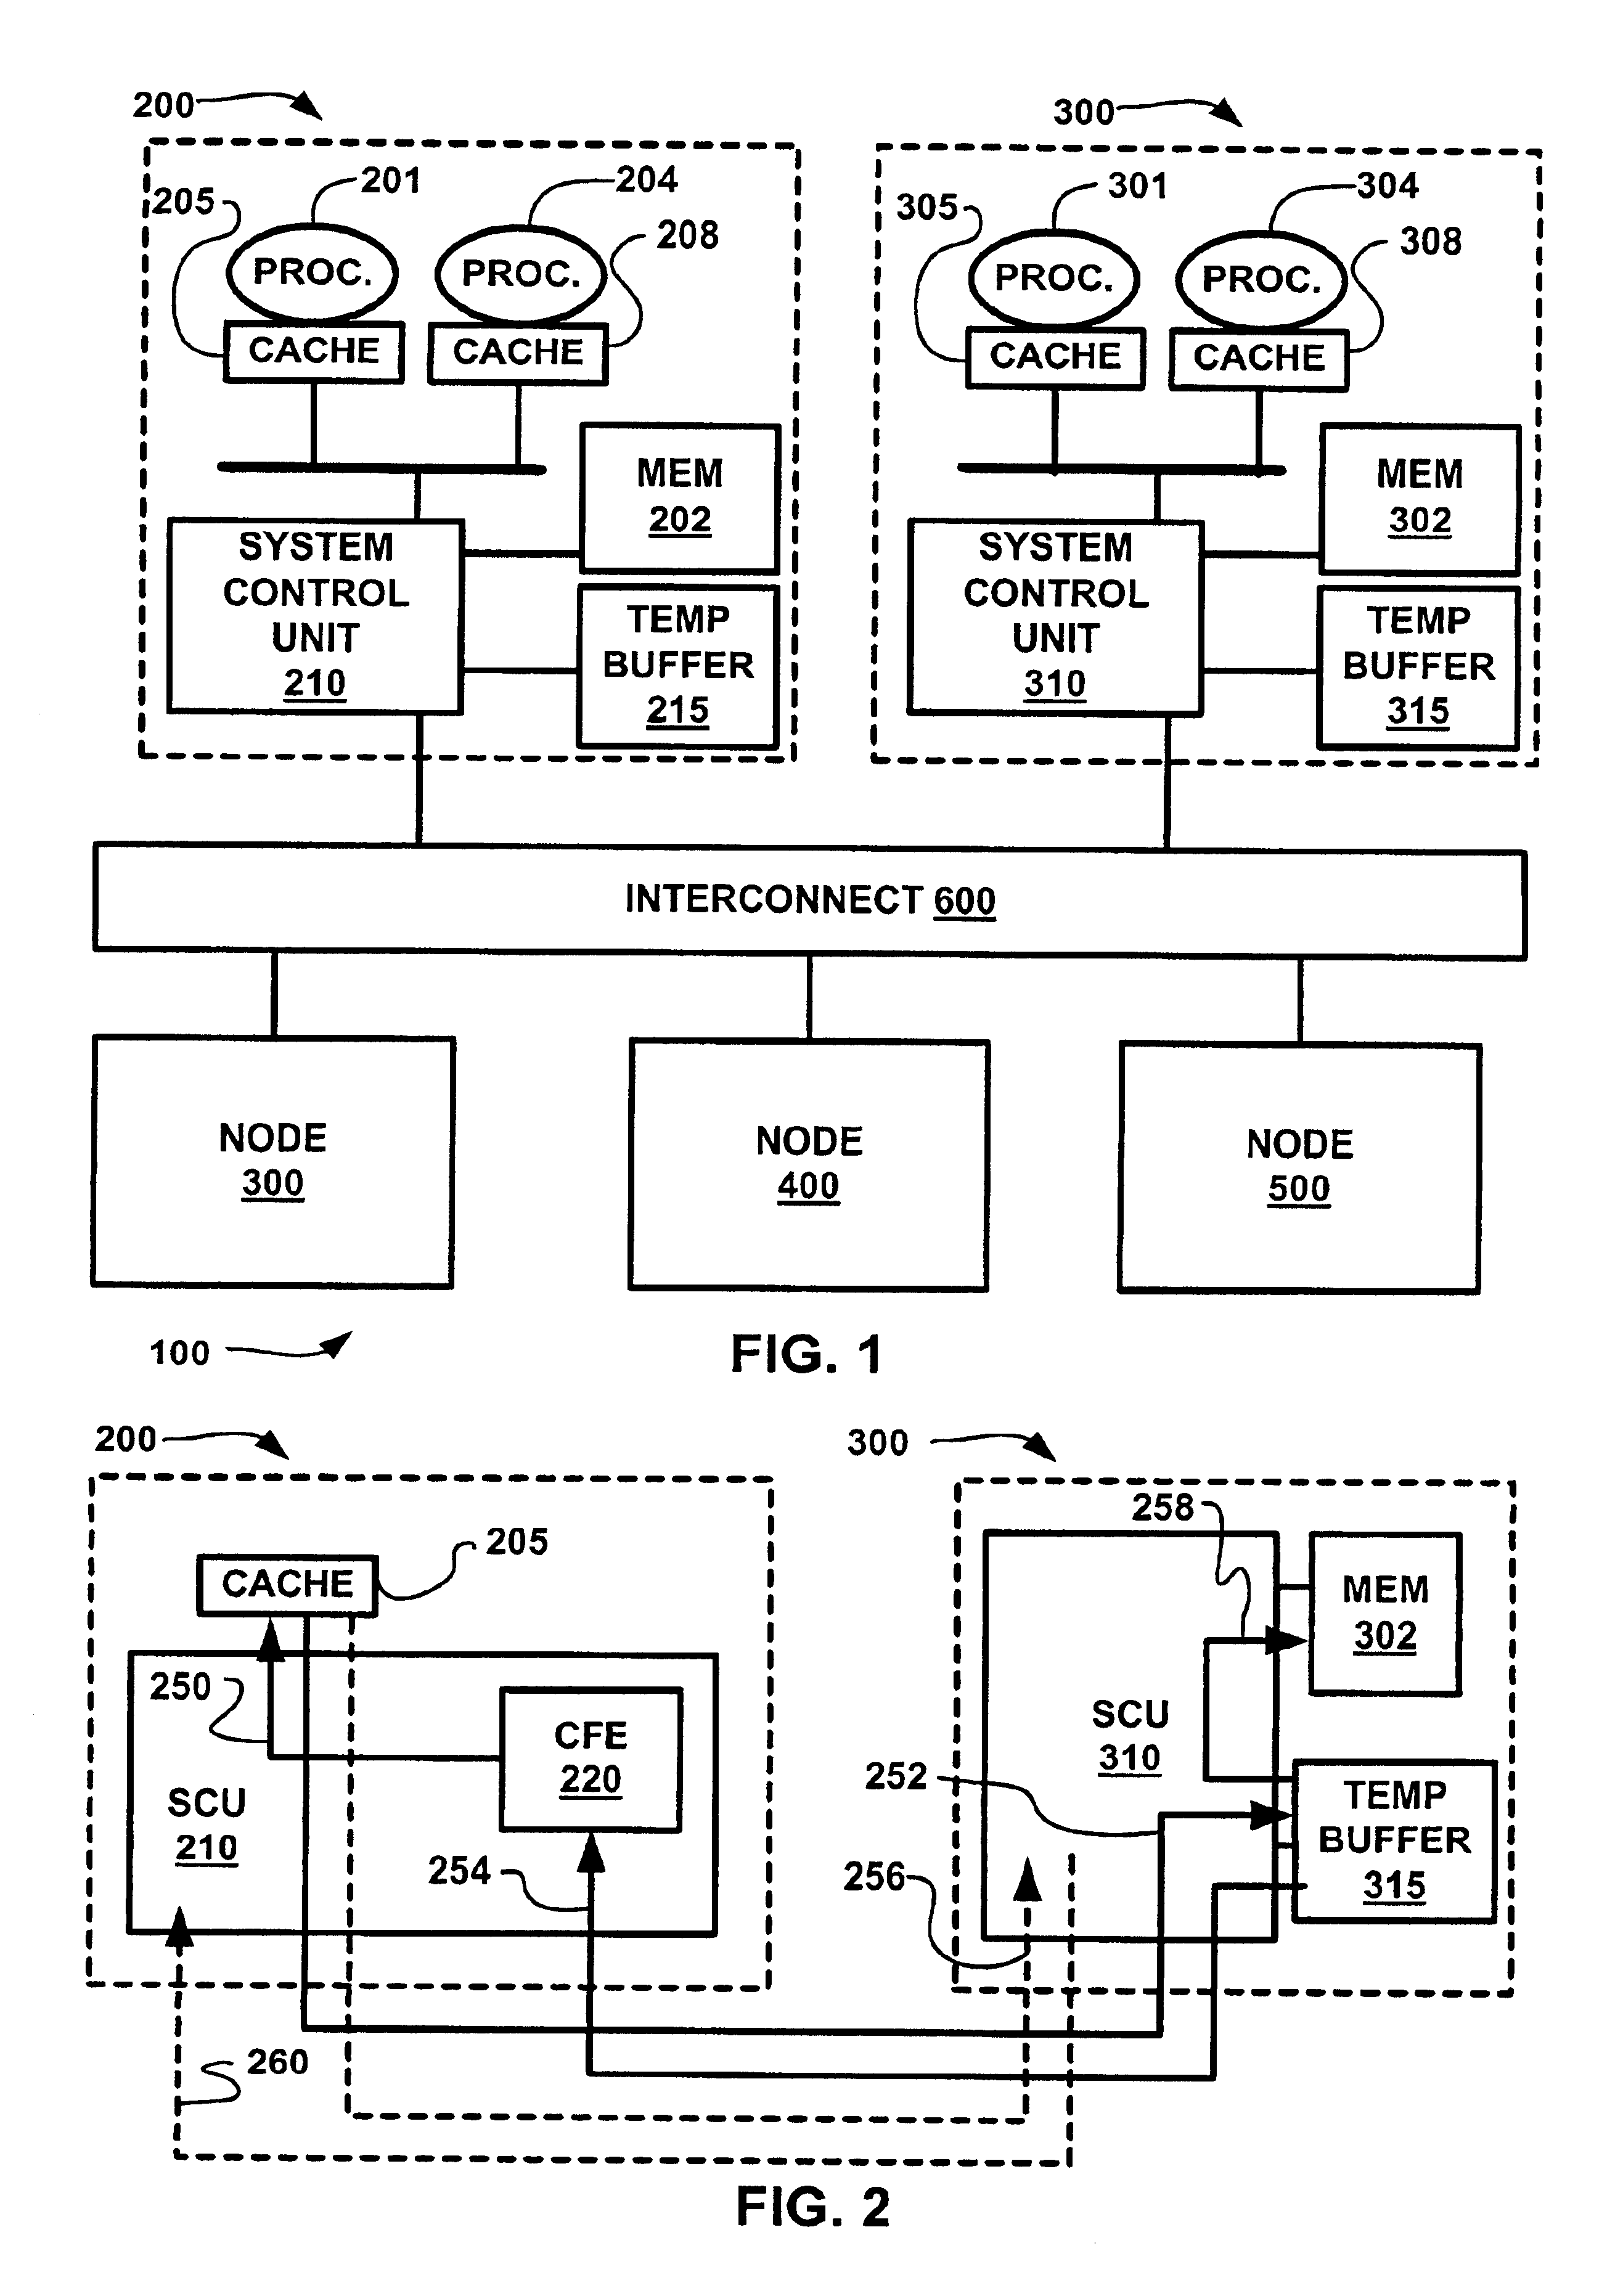 Multi-processor computer system with transactional memory